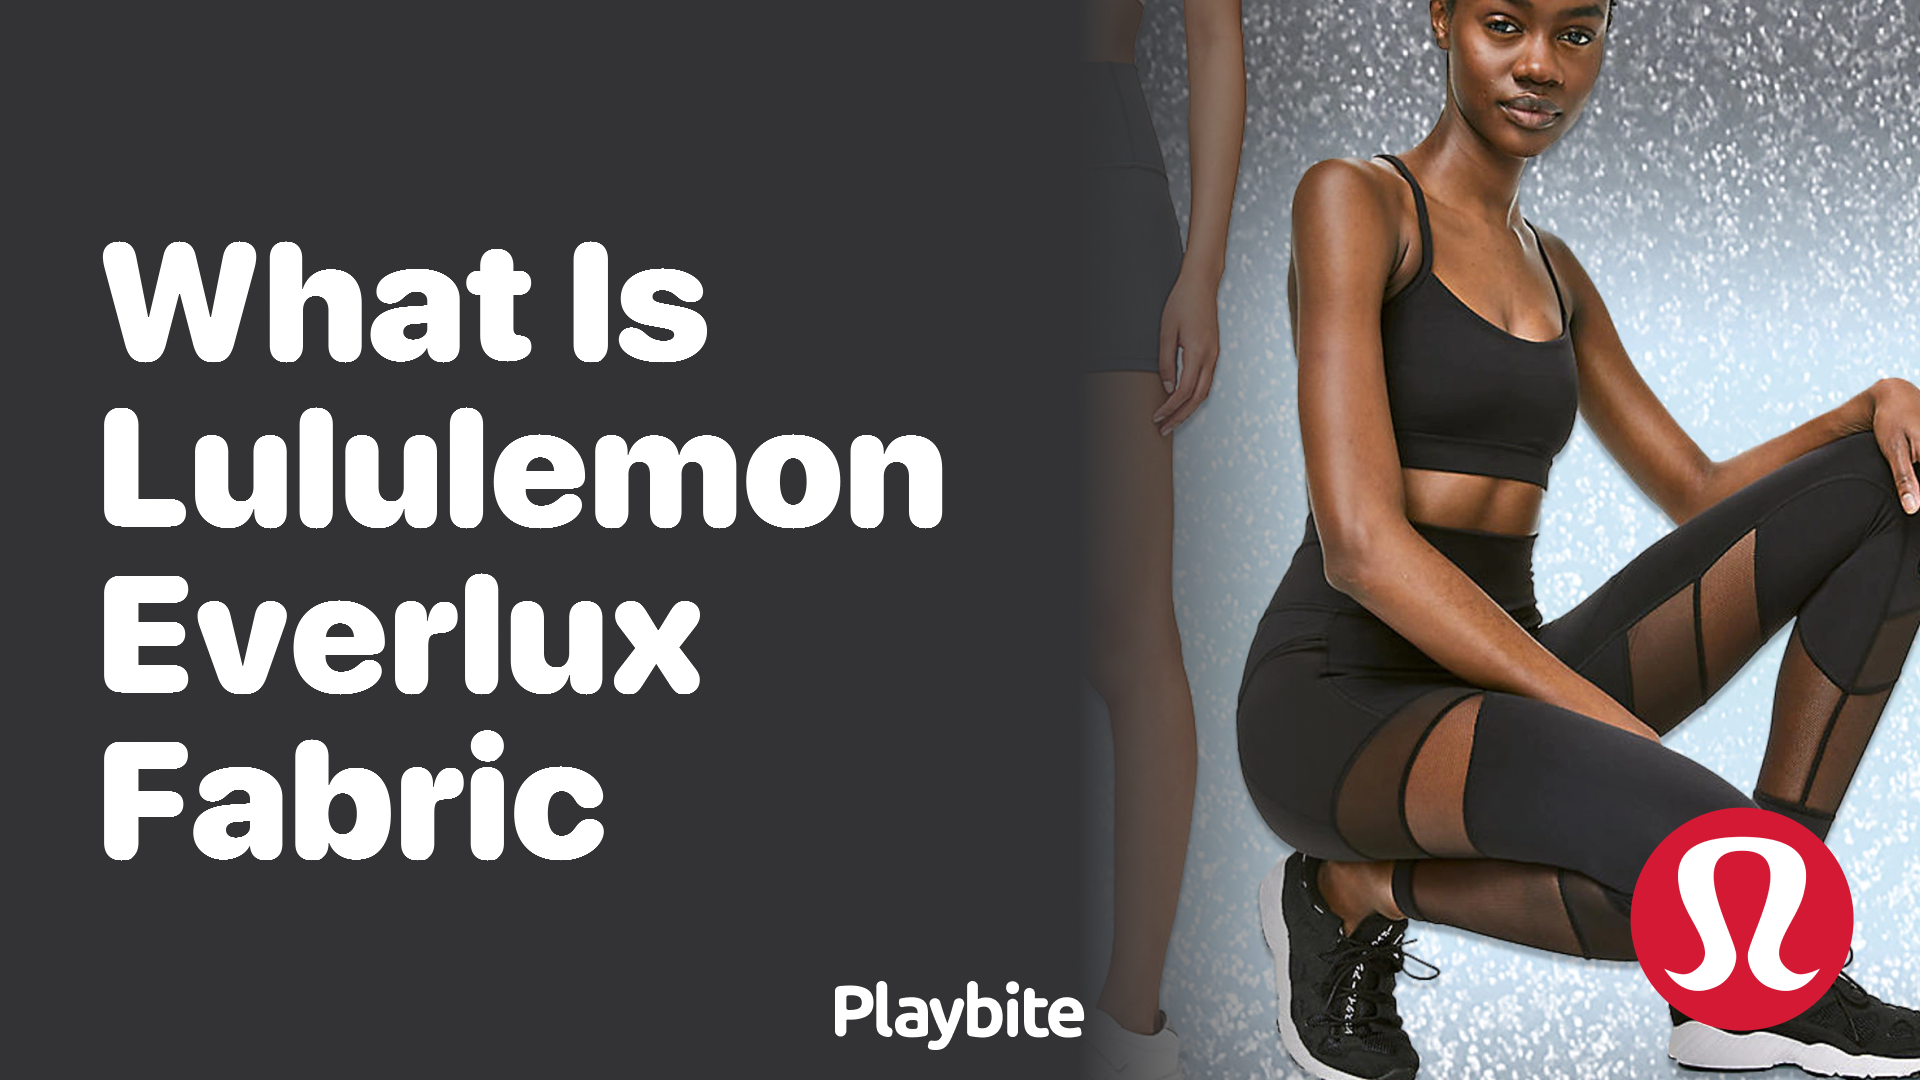 lululemon's launch of their fastest drying fabric: Everlux